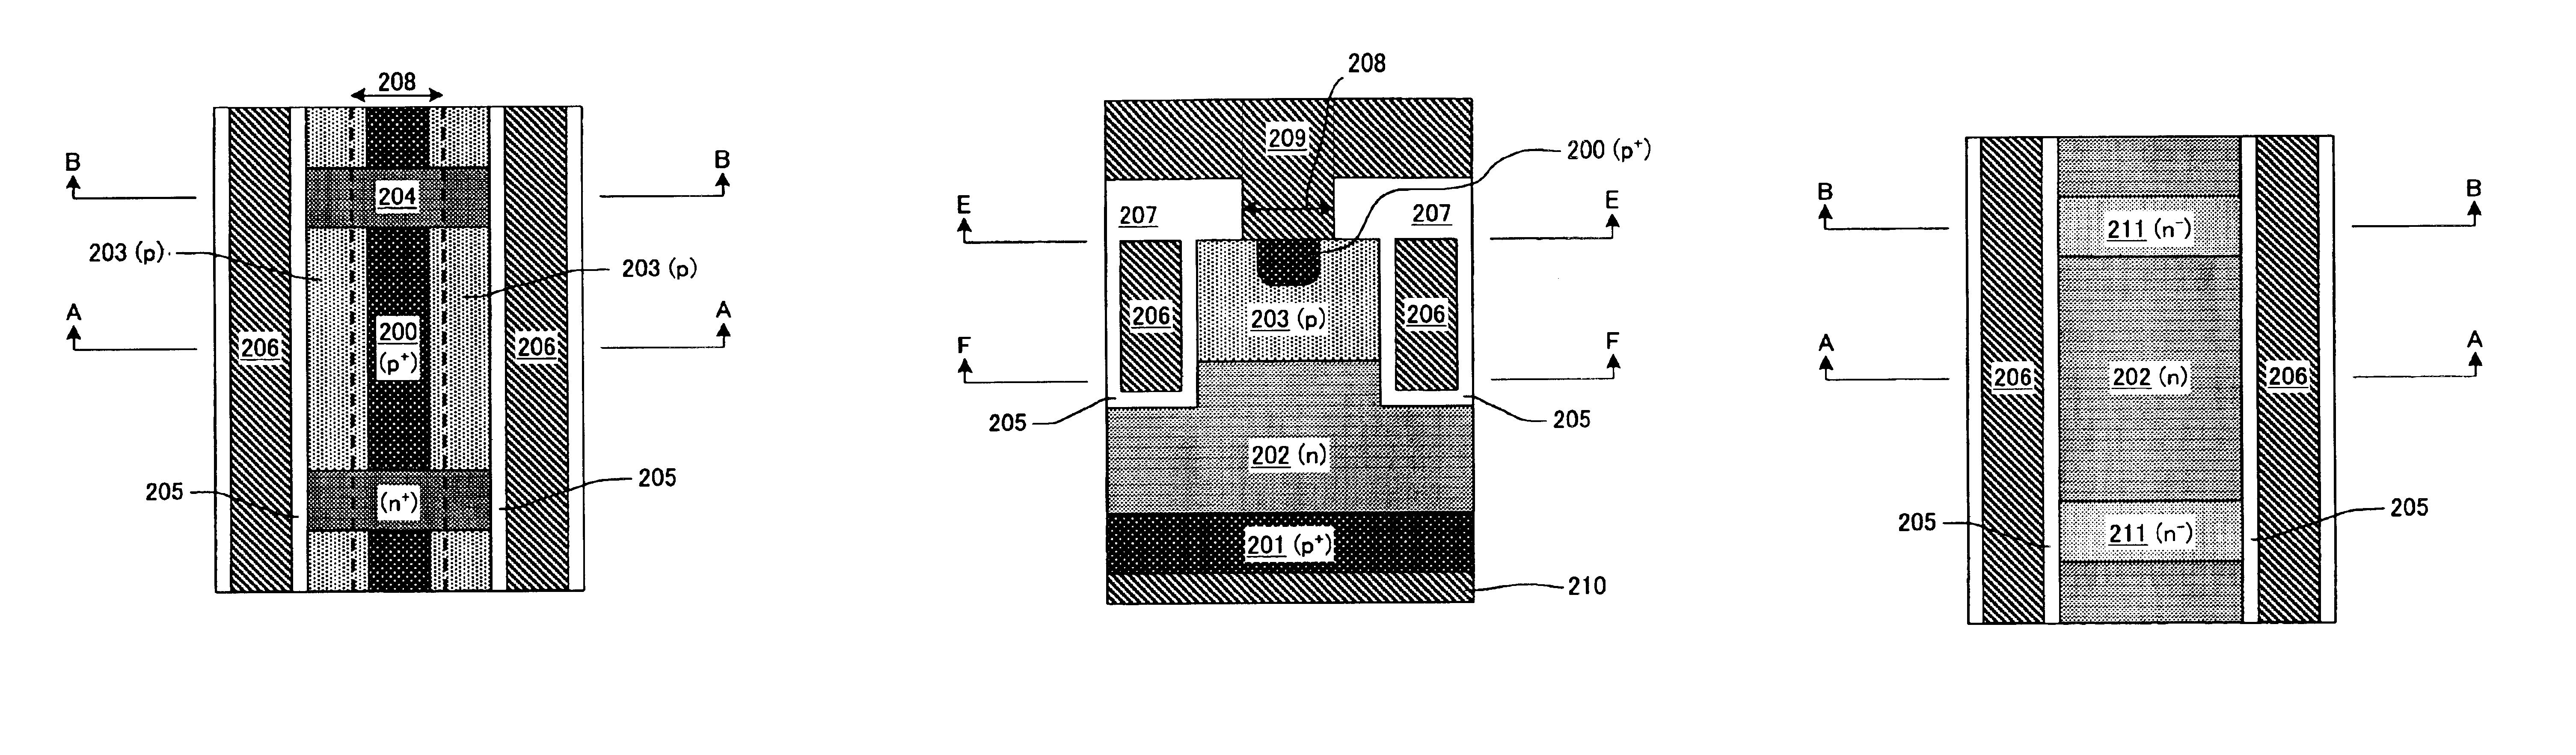 High withstand voltage field effect semiconductor device with a field dispersion region